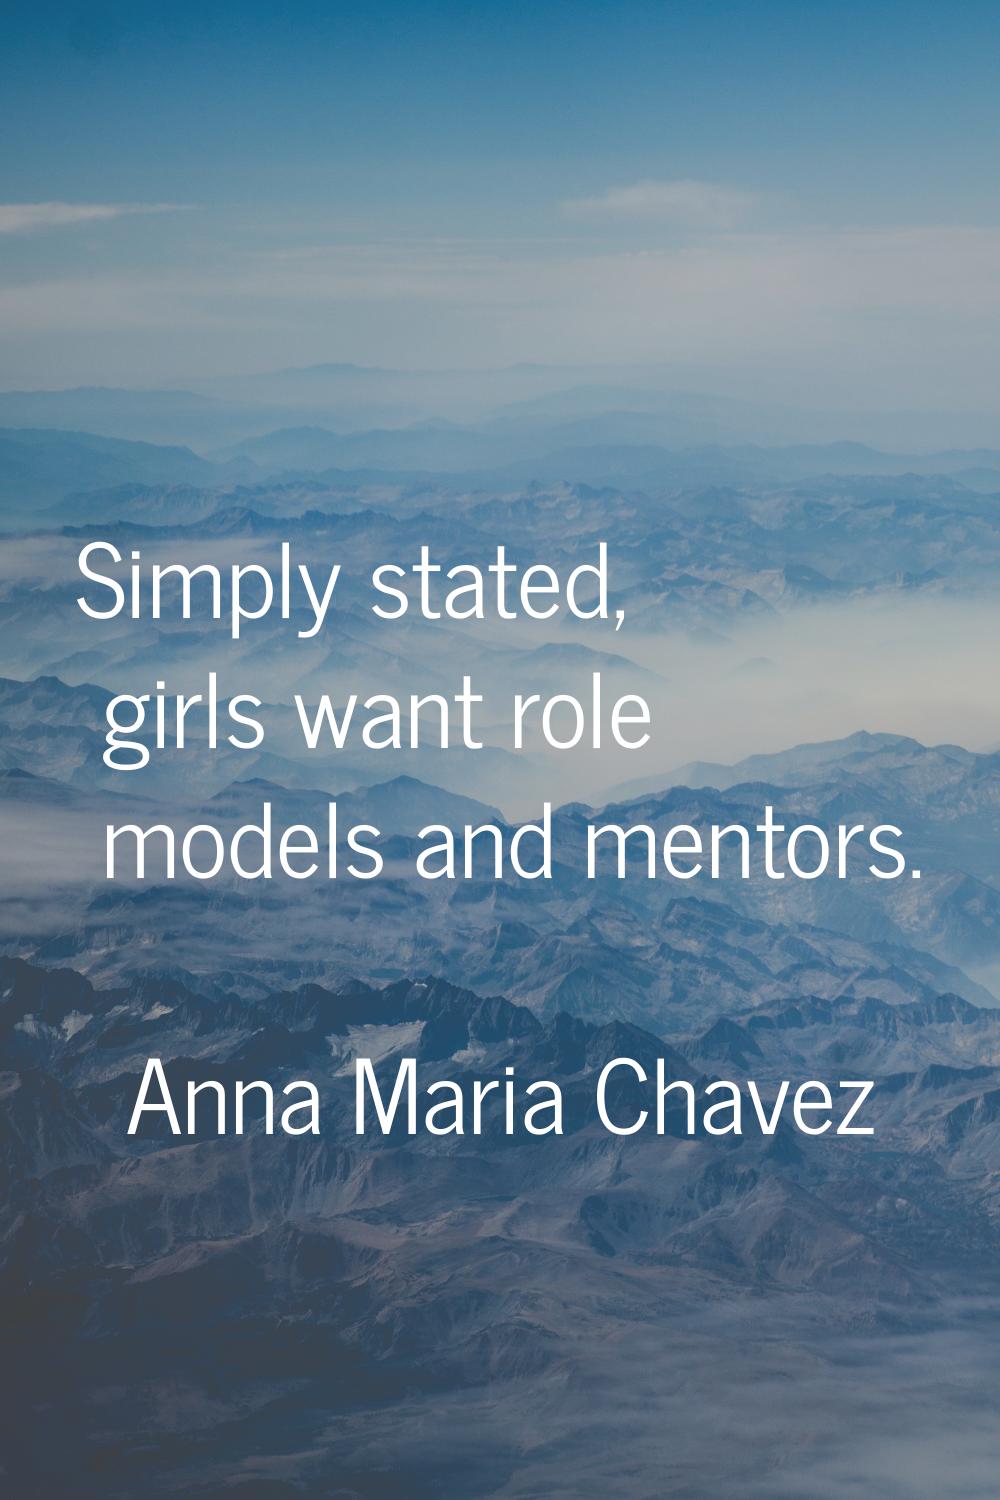 Simply stated, girls want role models and mentors.